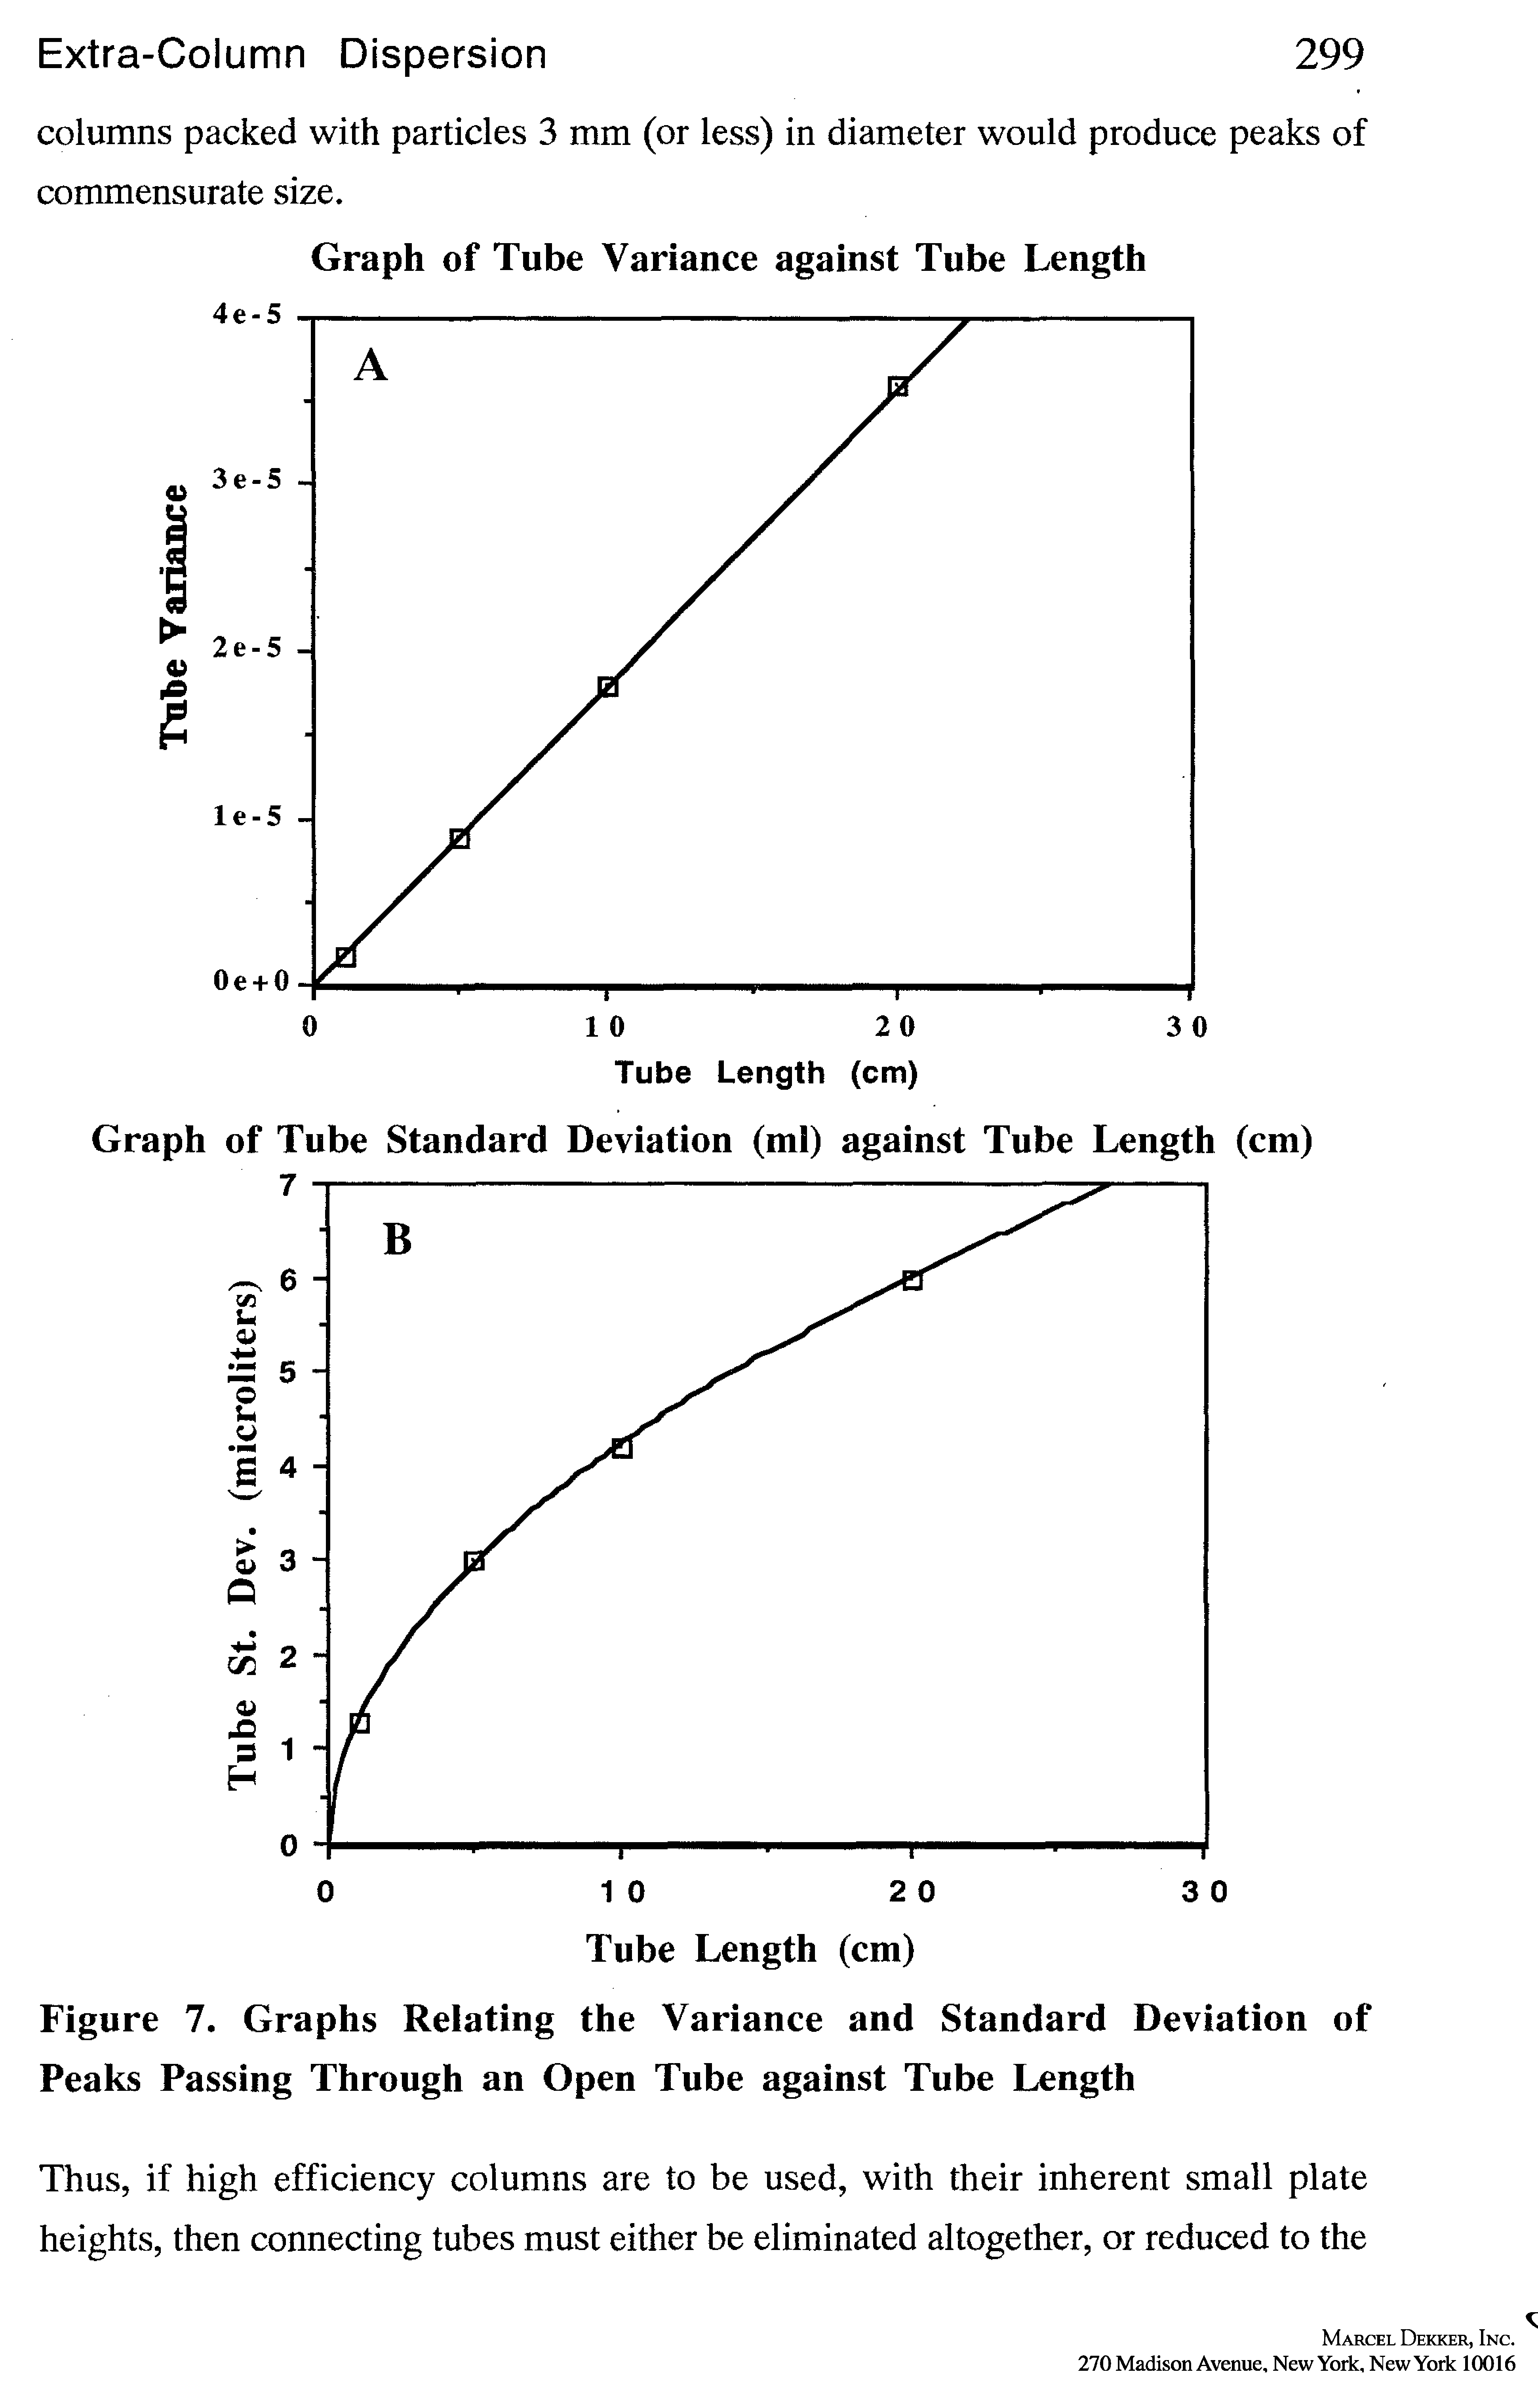 Figure 7. Graphs Relating the Variance and Standard Deviation of Peaks Passing Through an Open Tube against Tube Length...